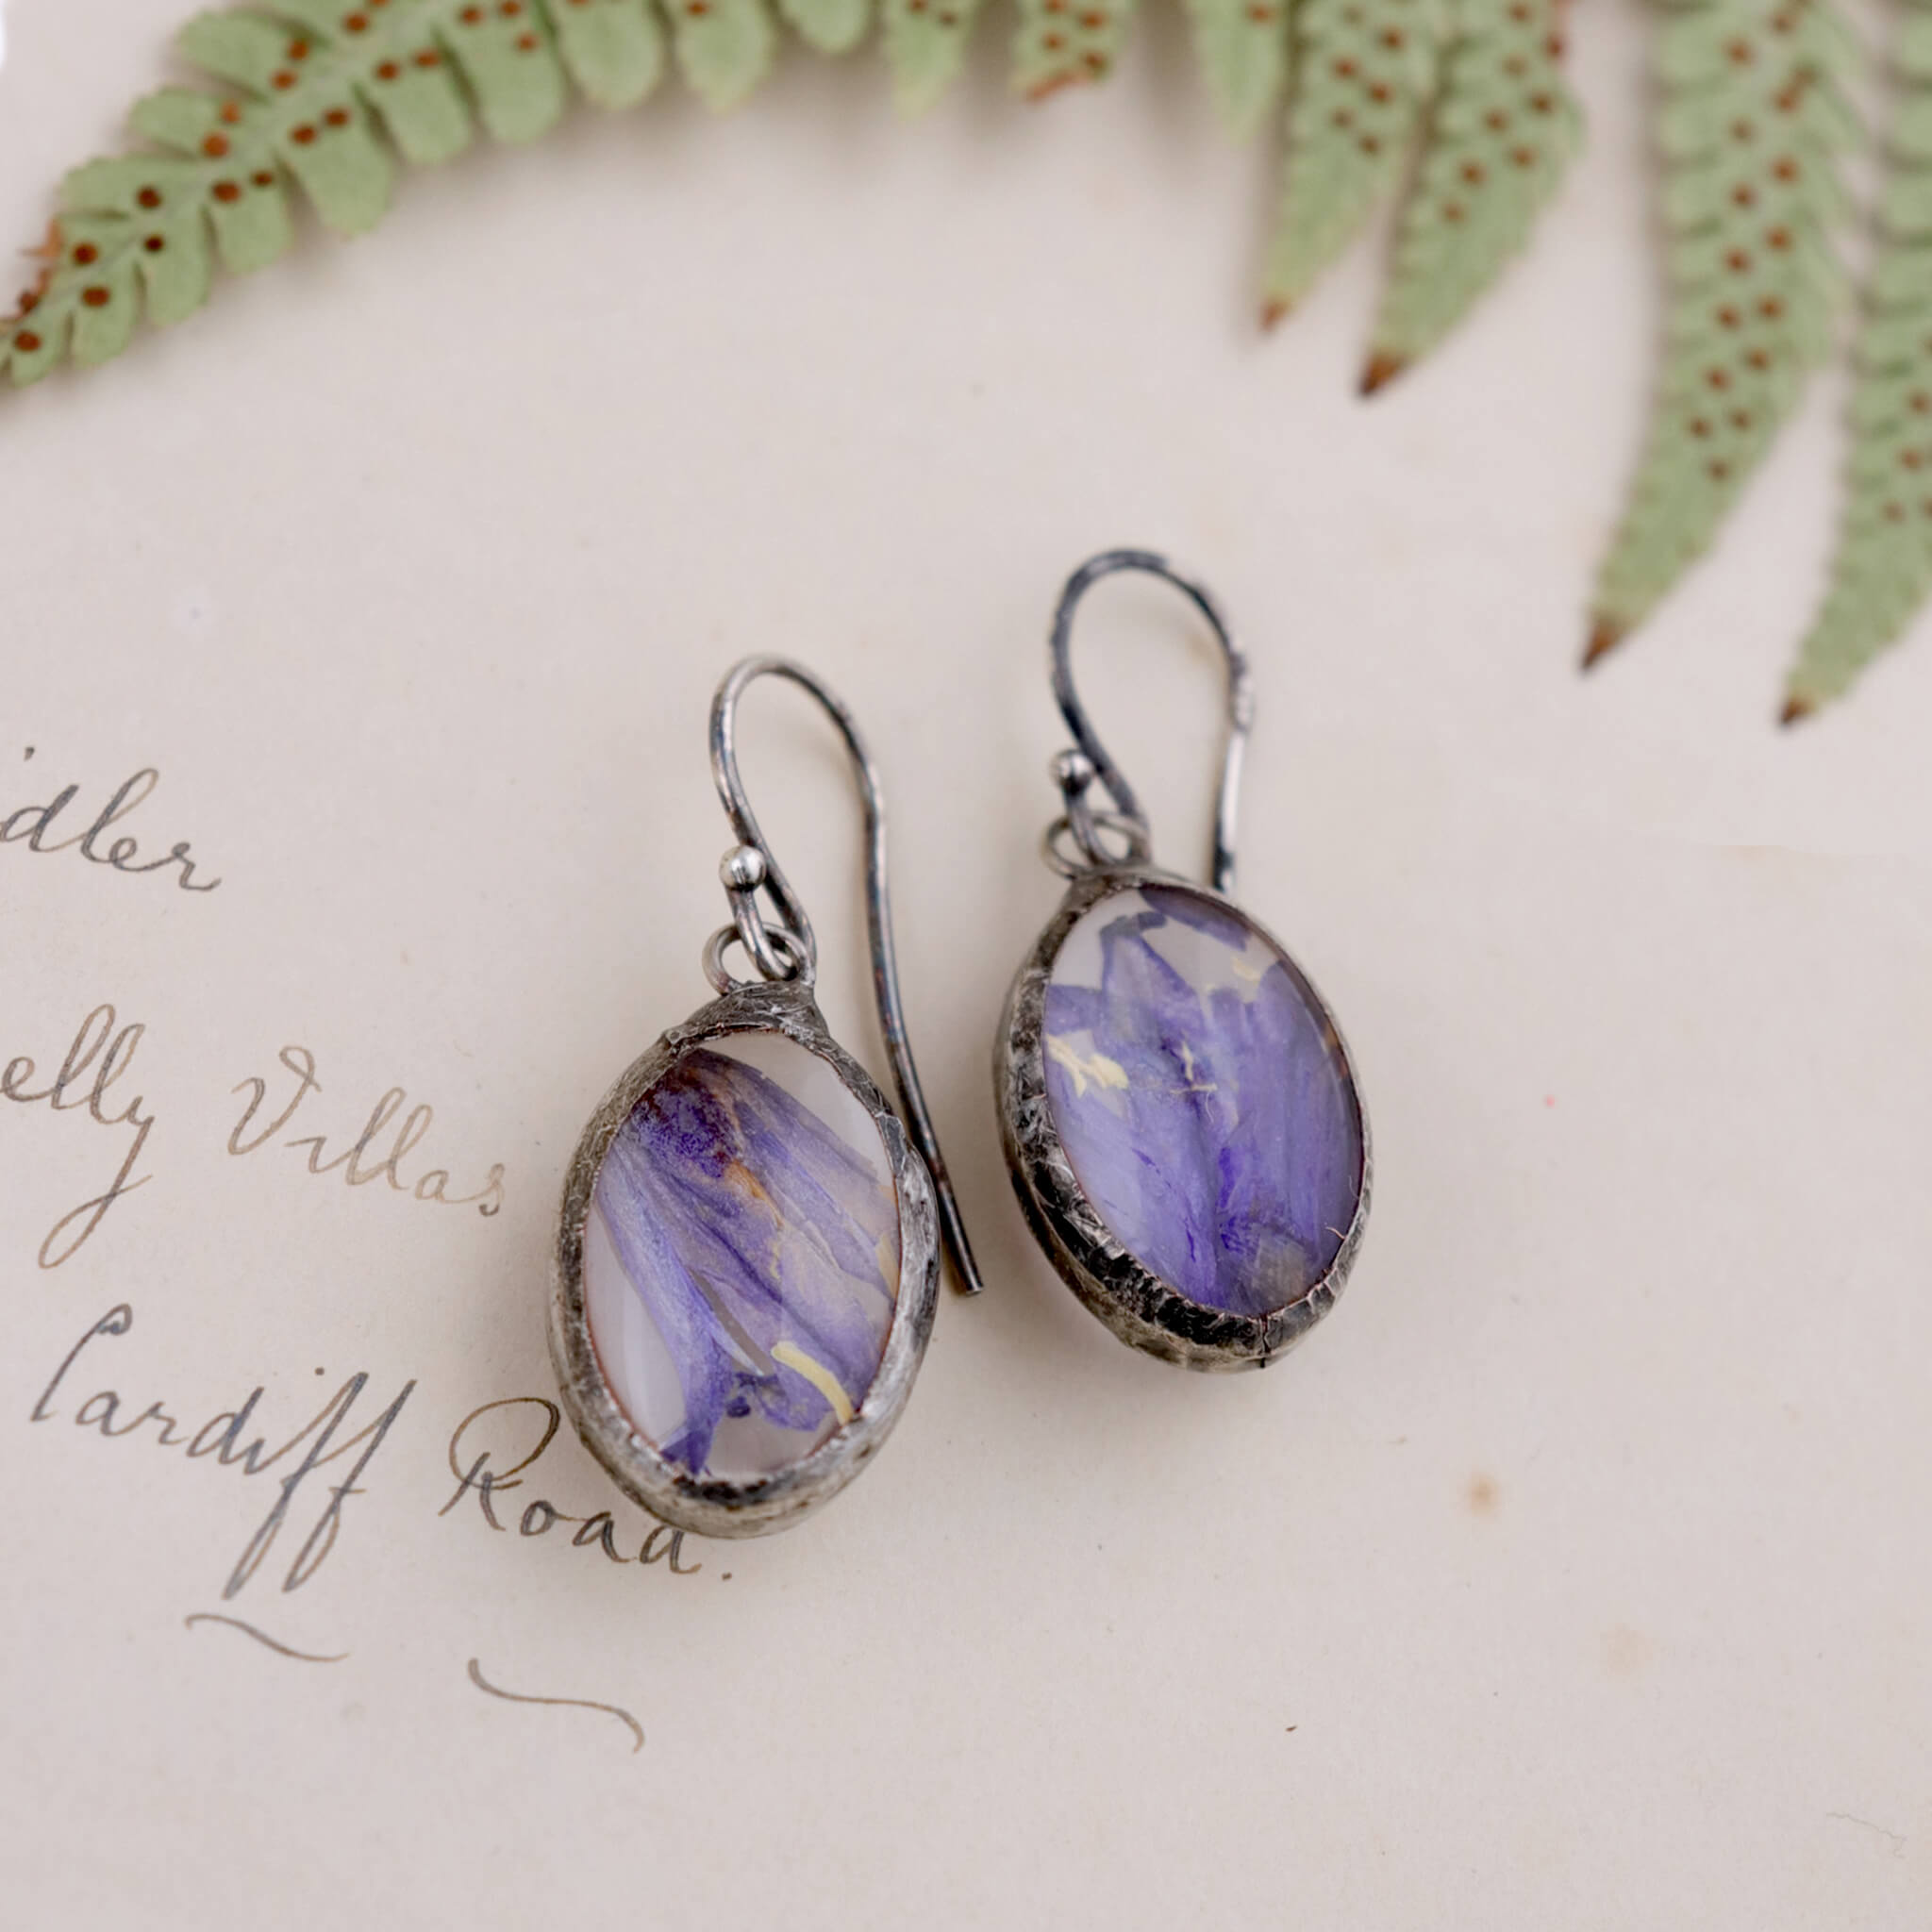 Earrings with real bluebells lying on an old letter